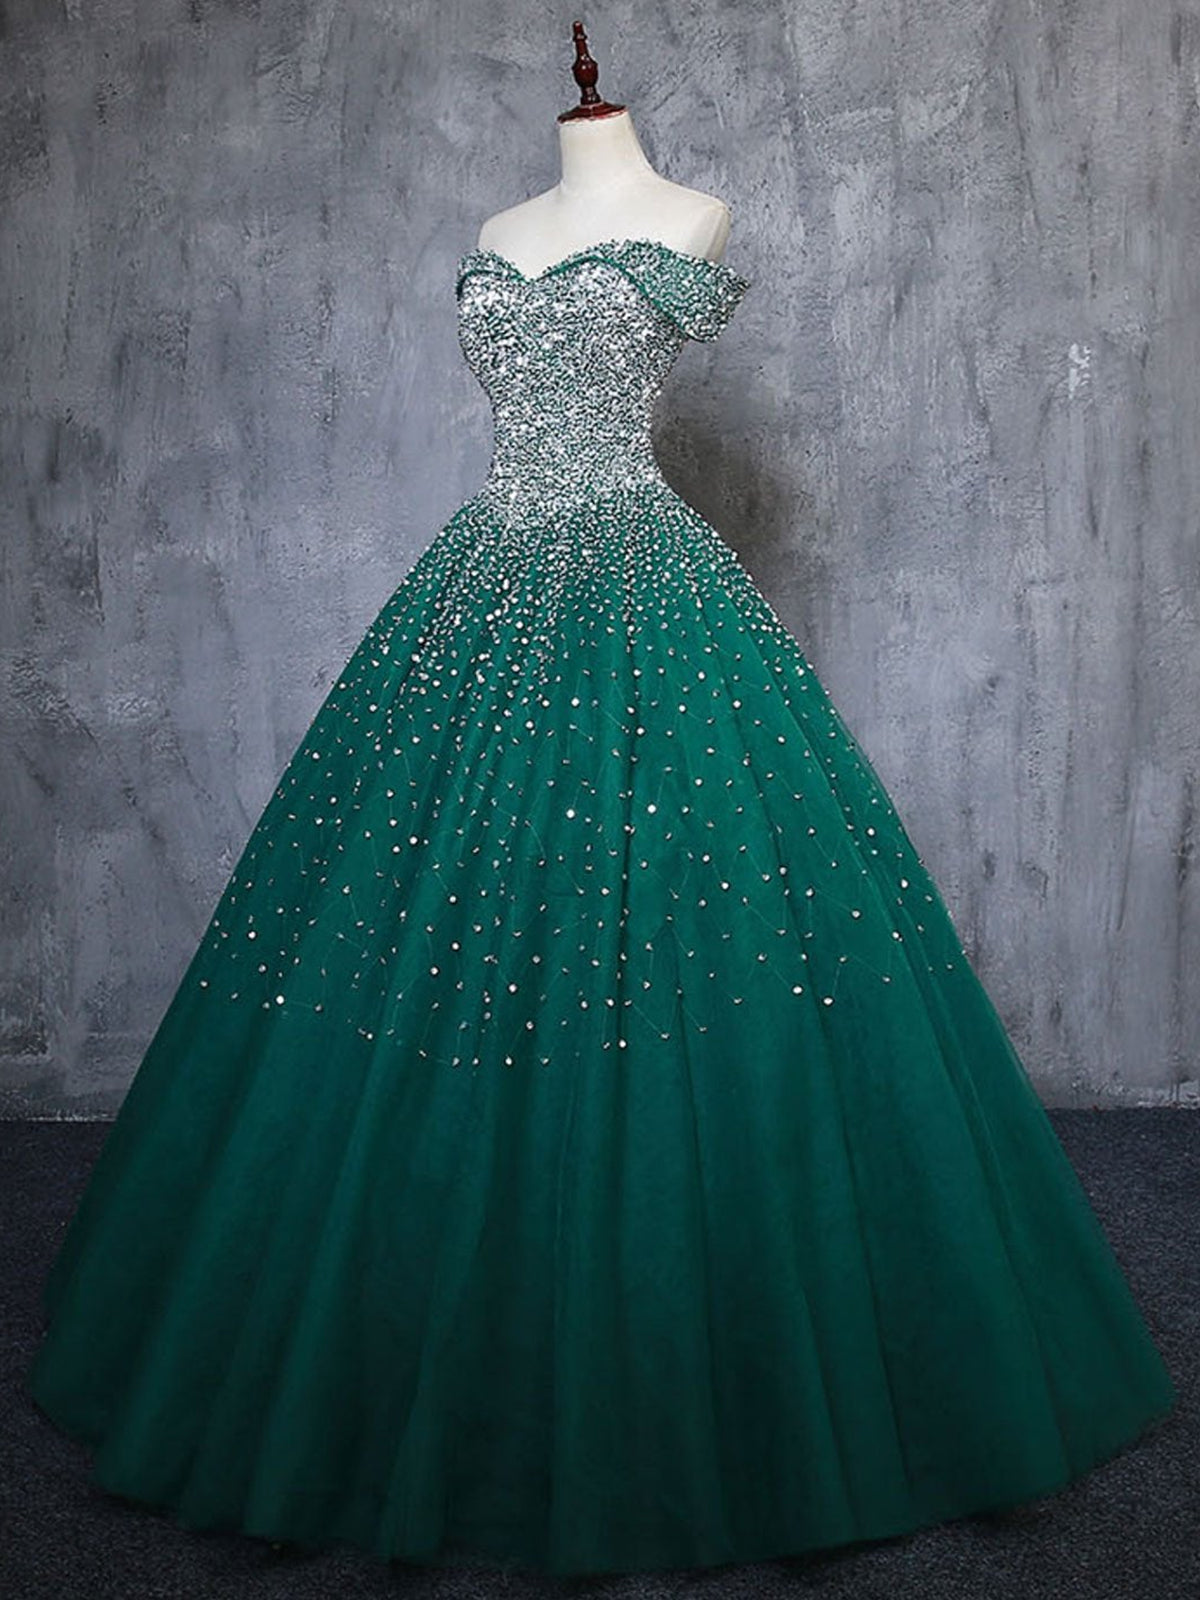 Gorgeous Off Shoulder Beaded Green Tulle Long Prom Dresses, Beaded Green Formal Evening Dresses, Beaded Ball Gown 